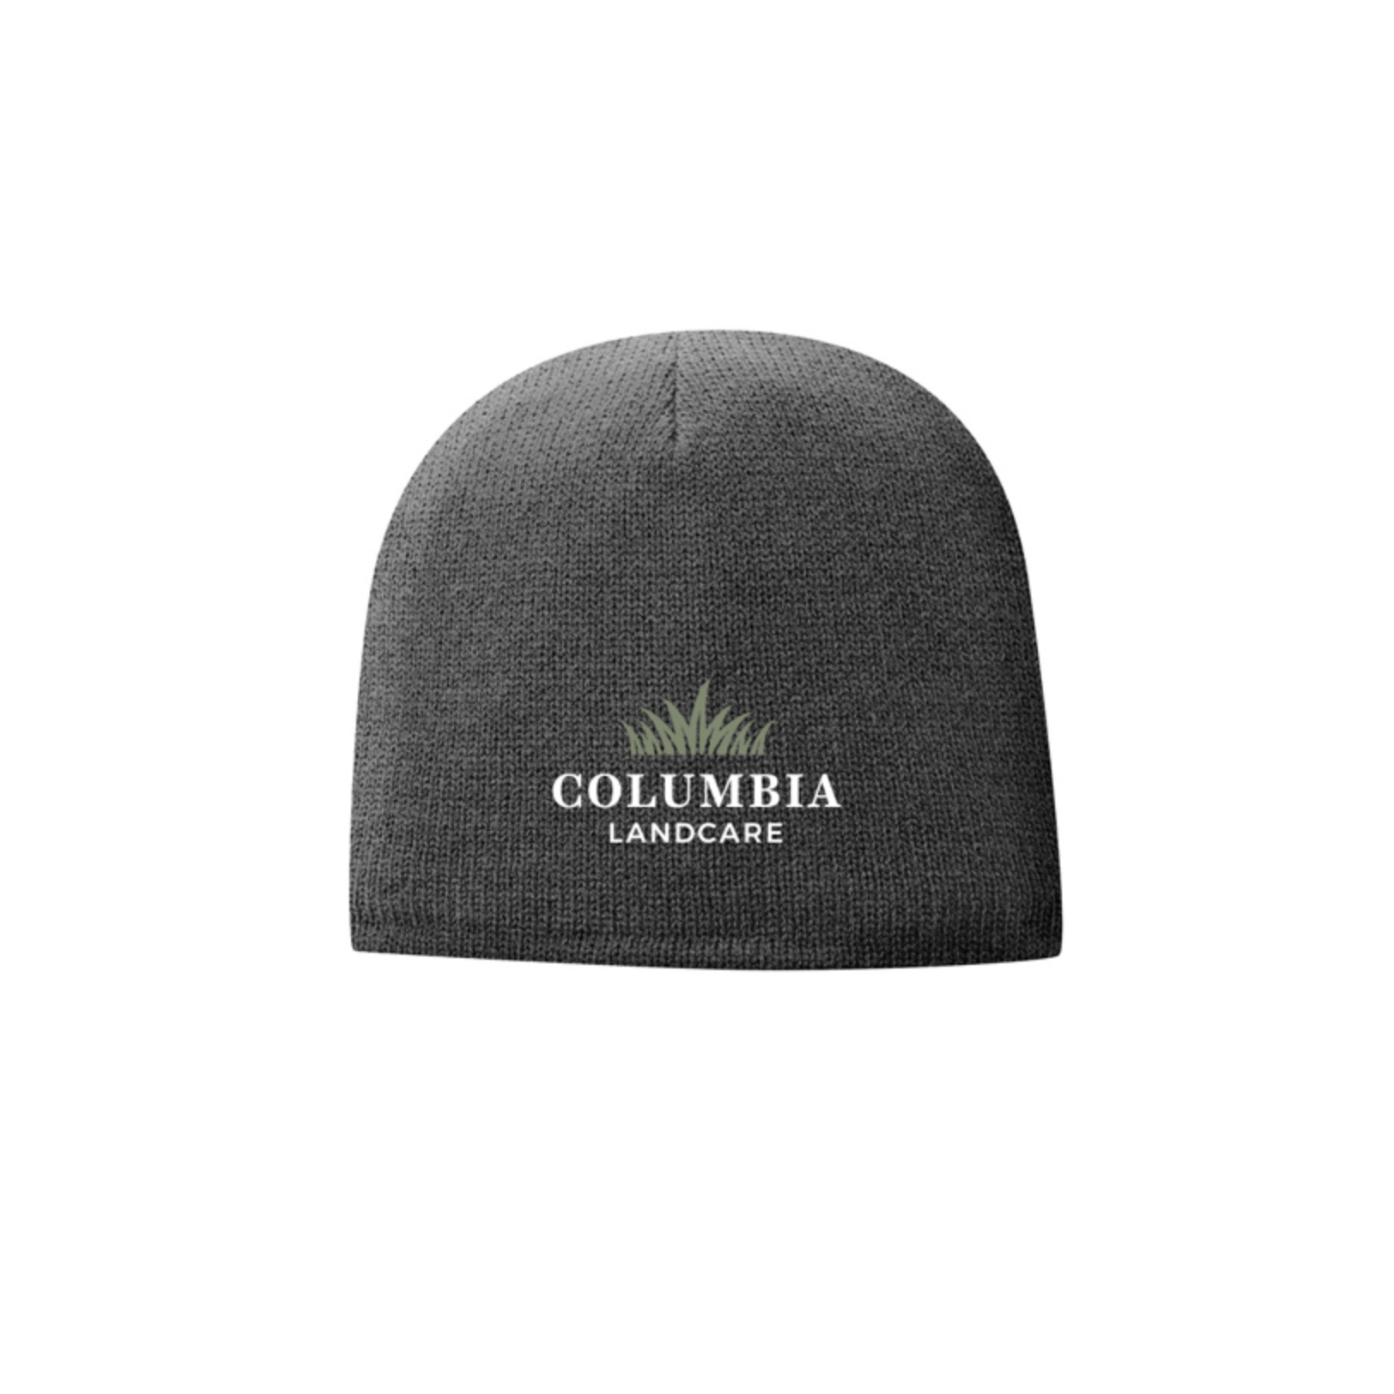 Columbia Fleece Lined Beanie - CP91L